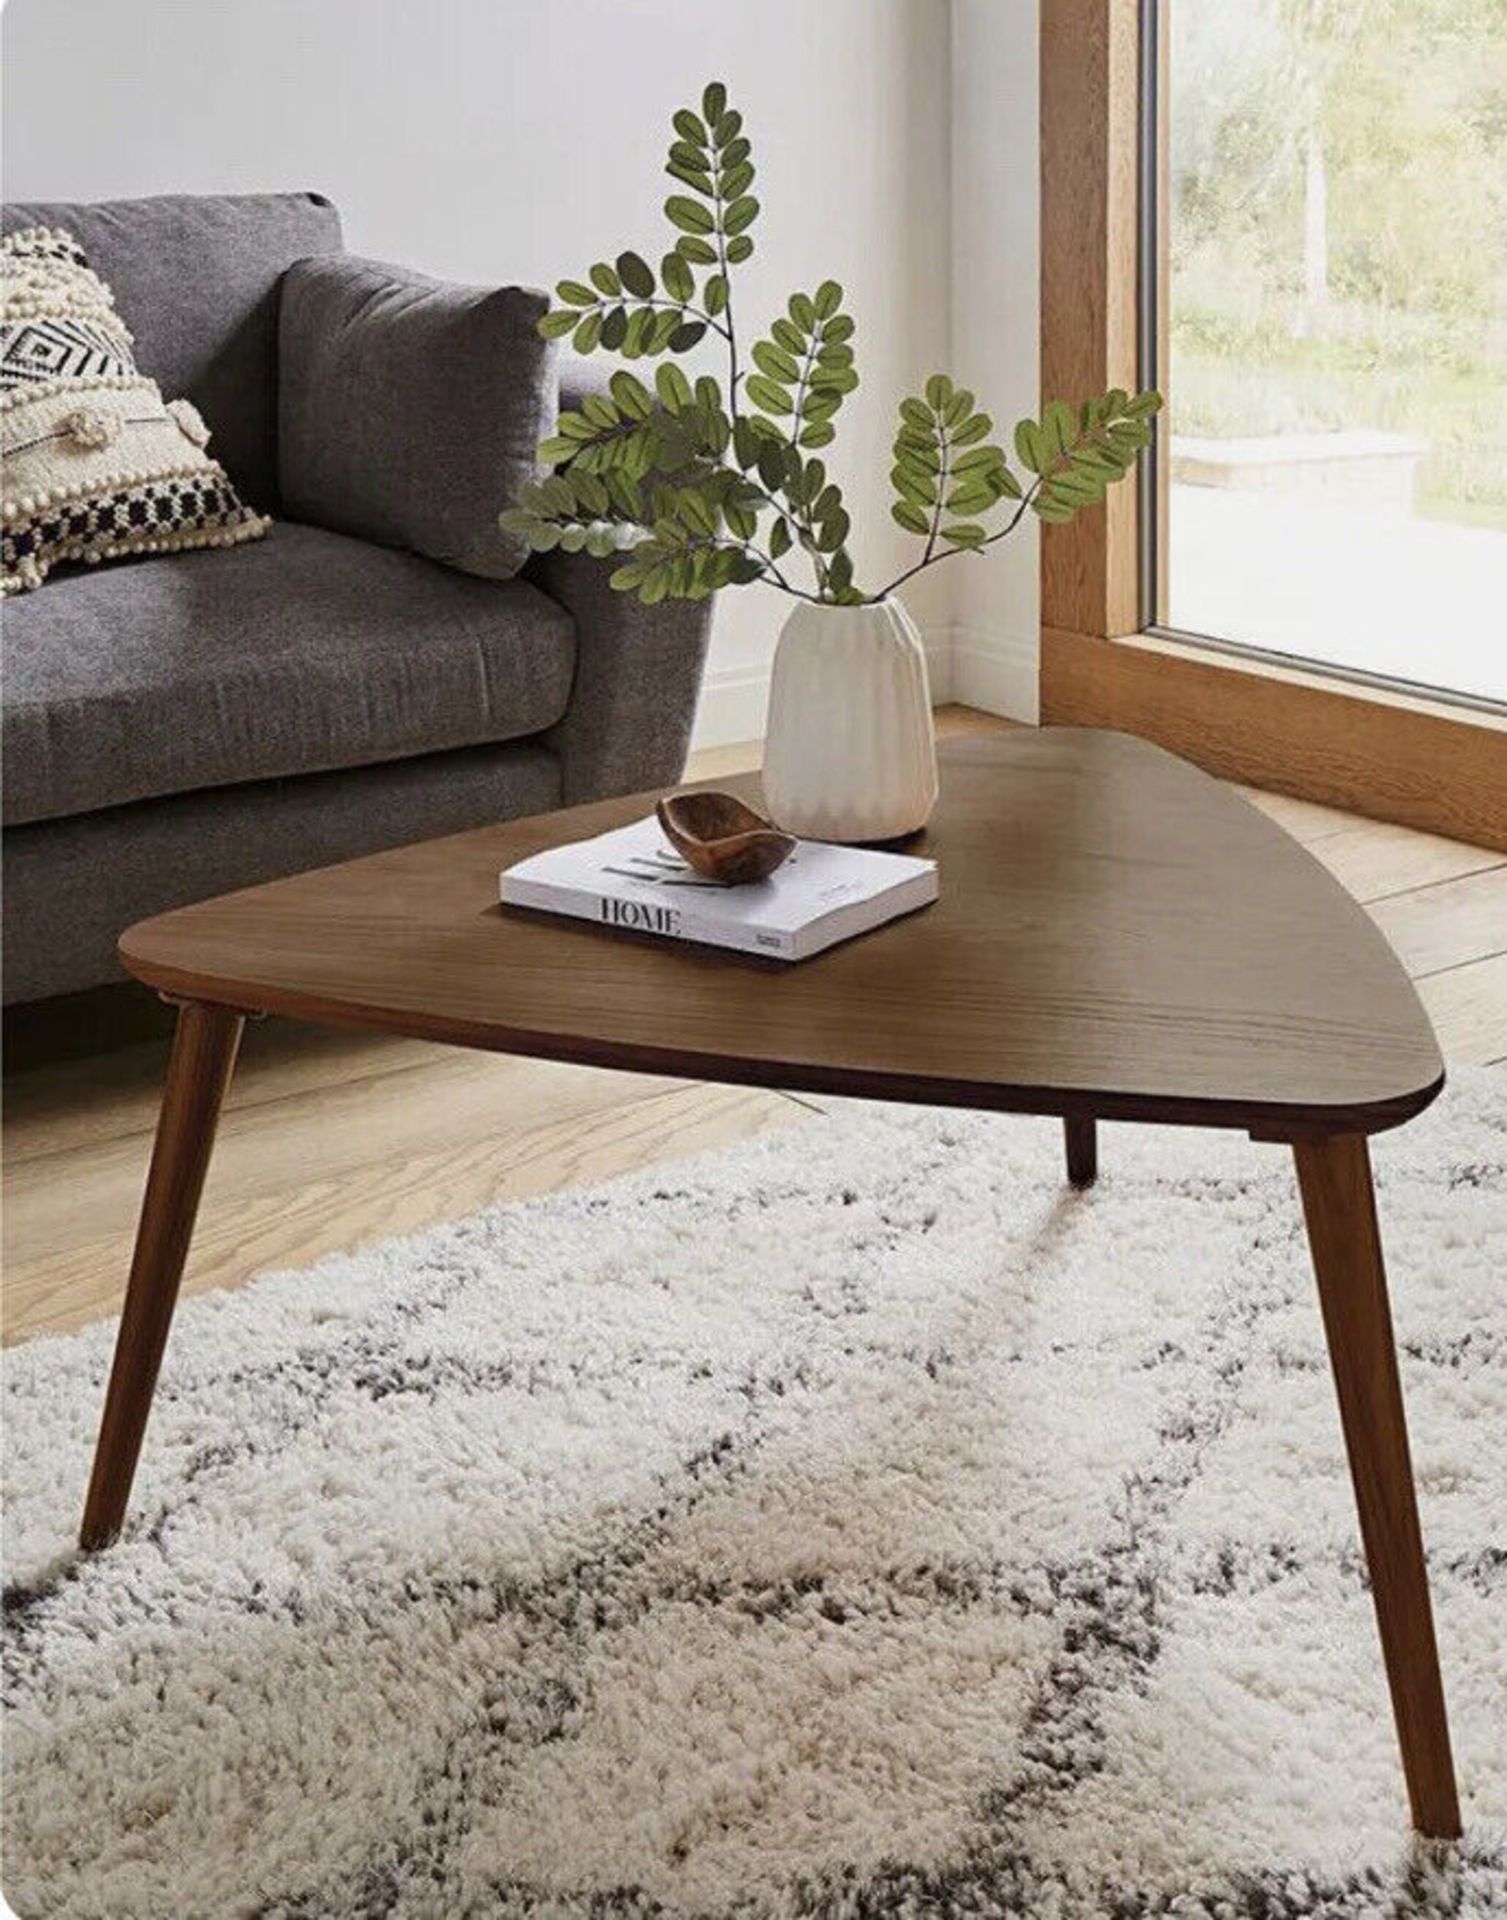 NEW & BOXED PEYTON Walnut Coffee Table. RRP £269. (R12-3). Part of At Home Luxe, the Peyton Walnut